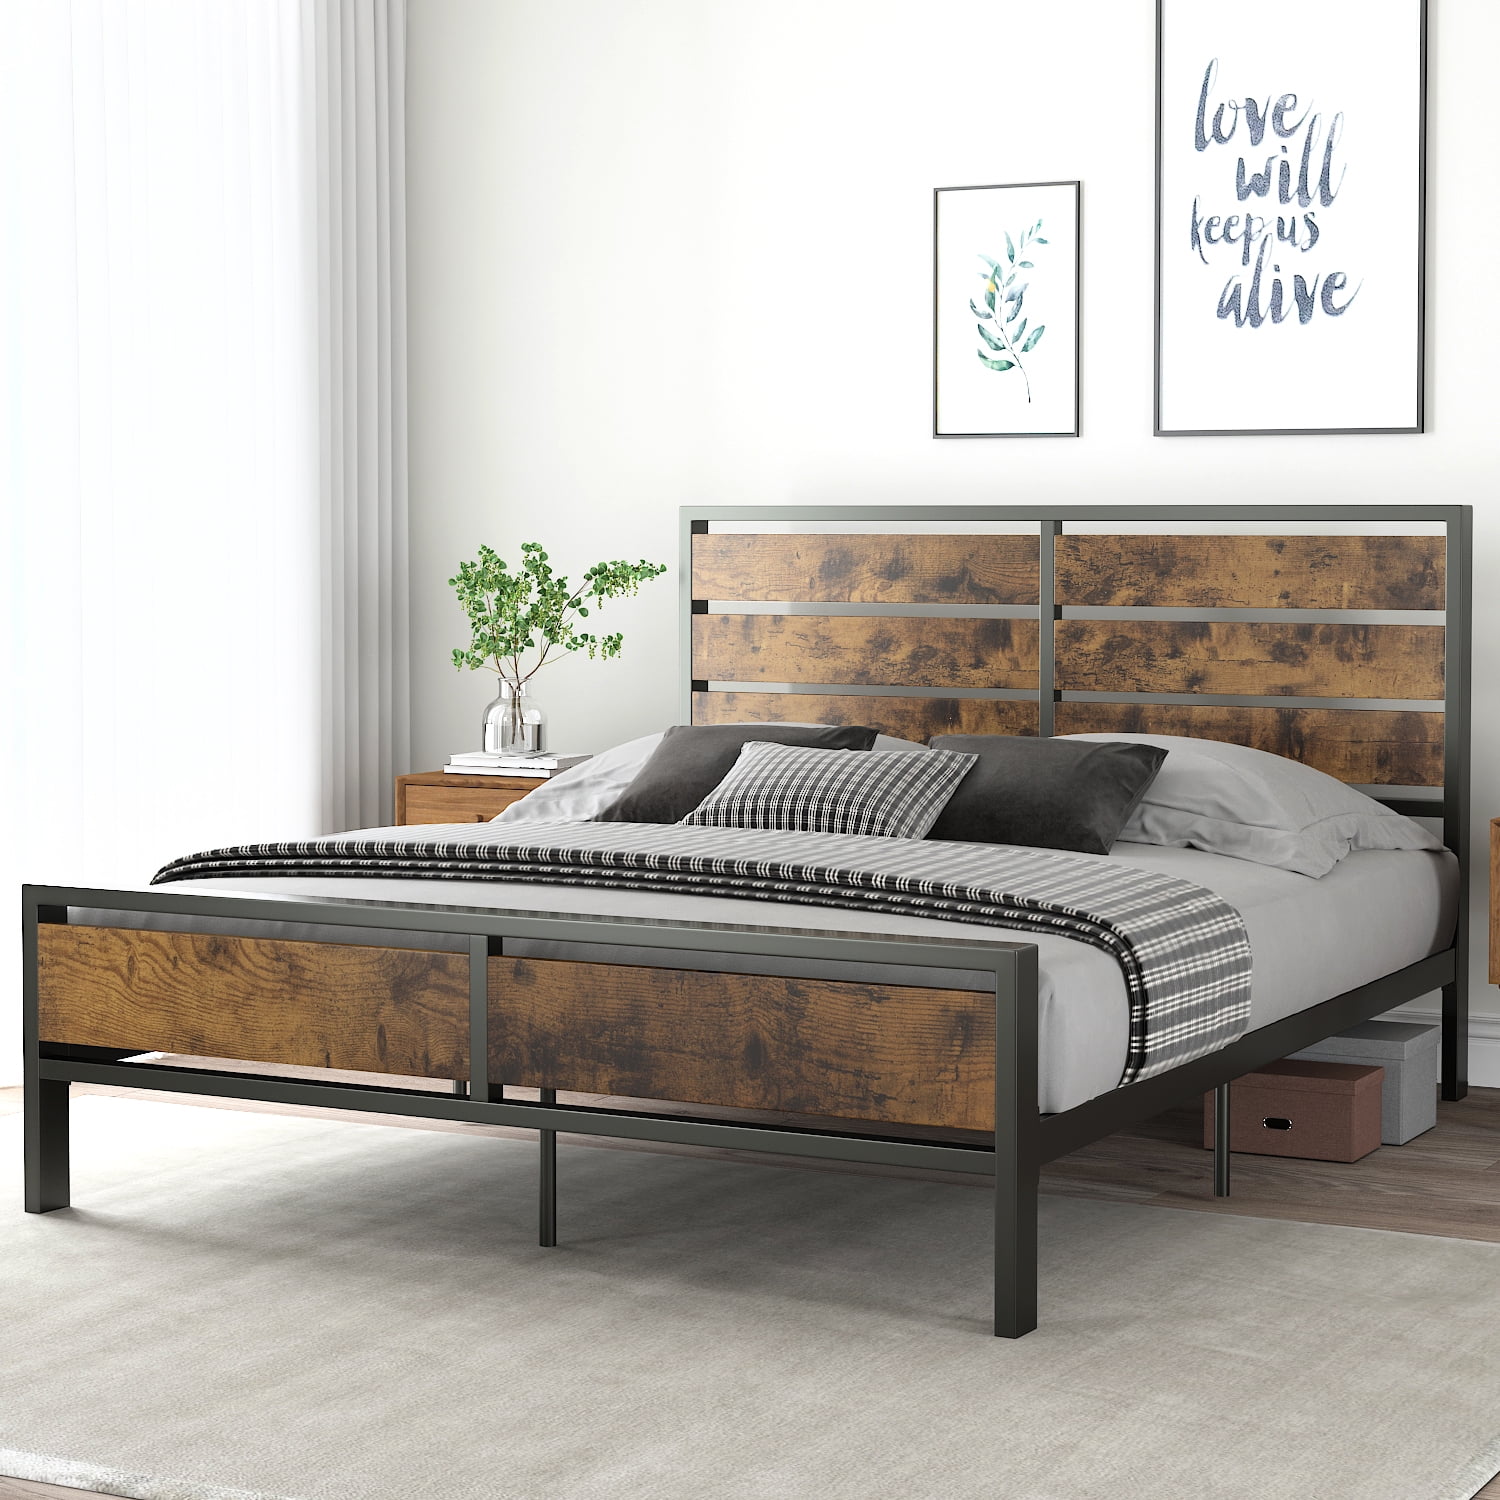 Amolife Queen Size Bed Frame With Wood, Metal Vs Wood Bed Frame